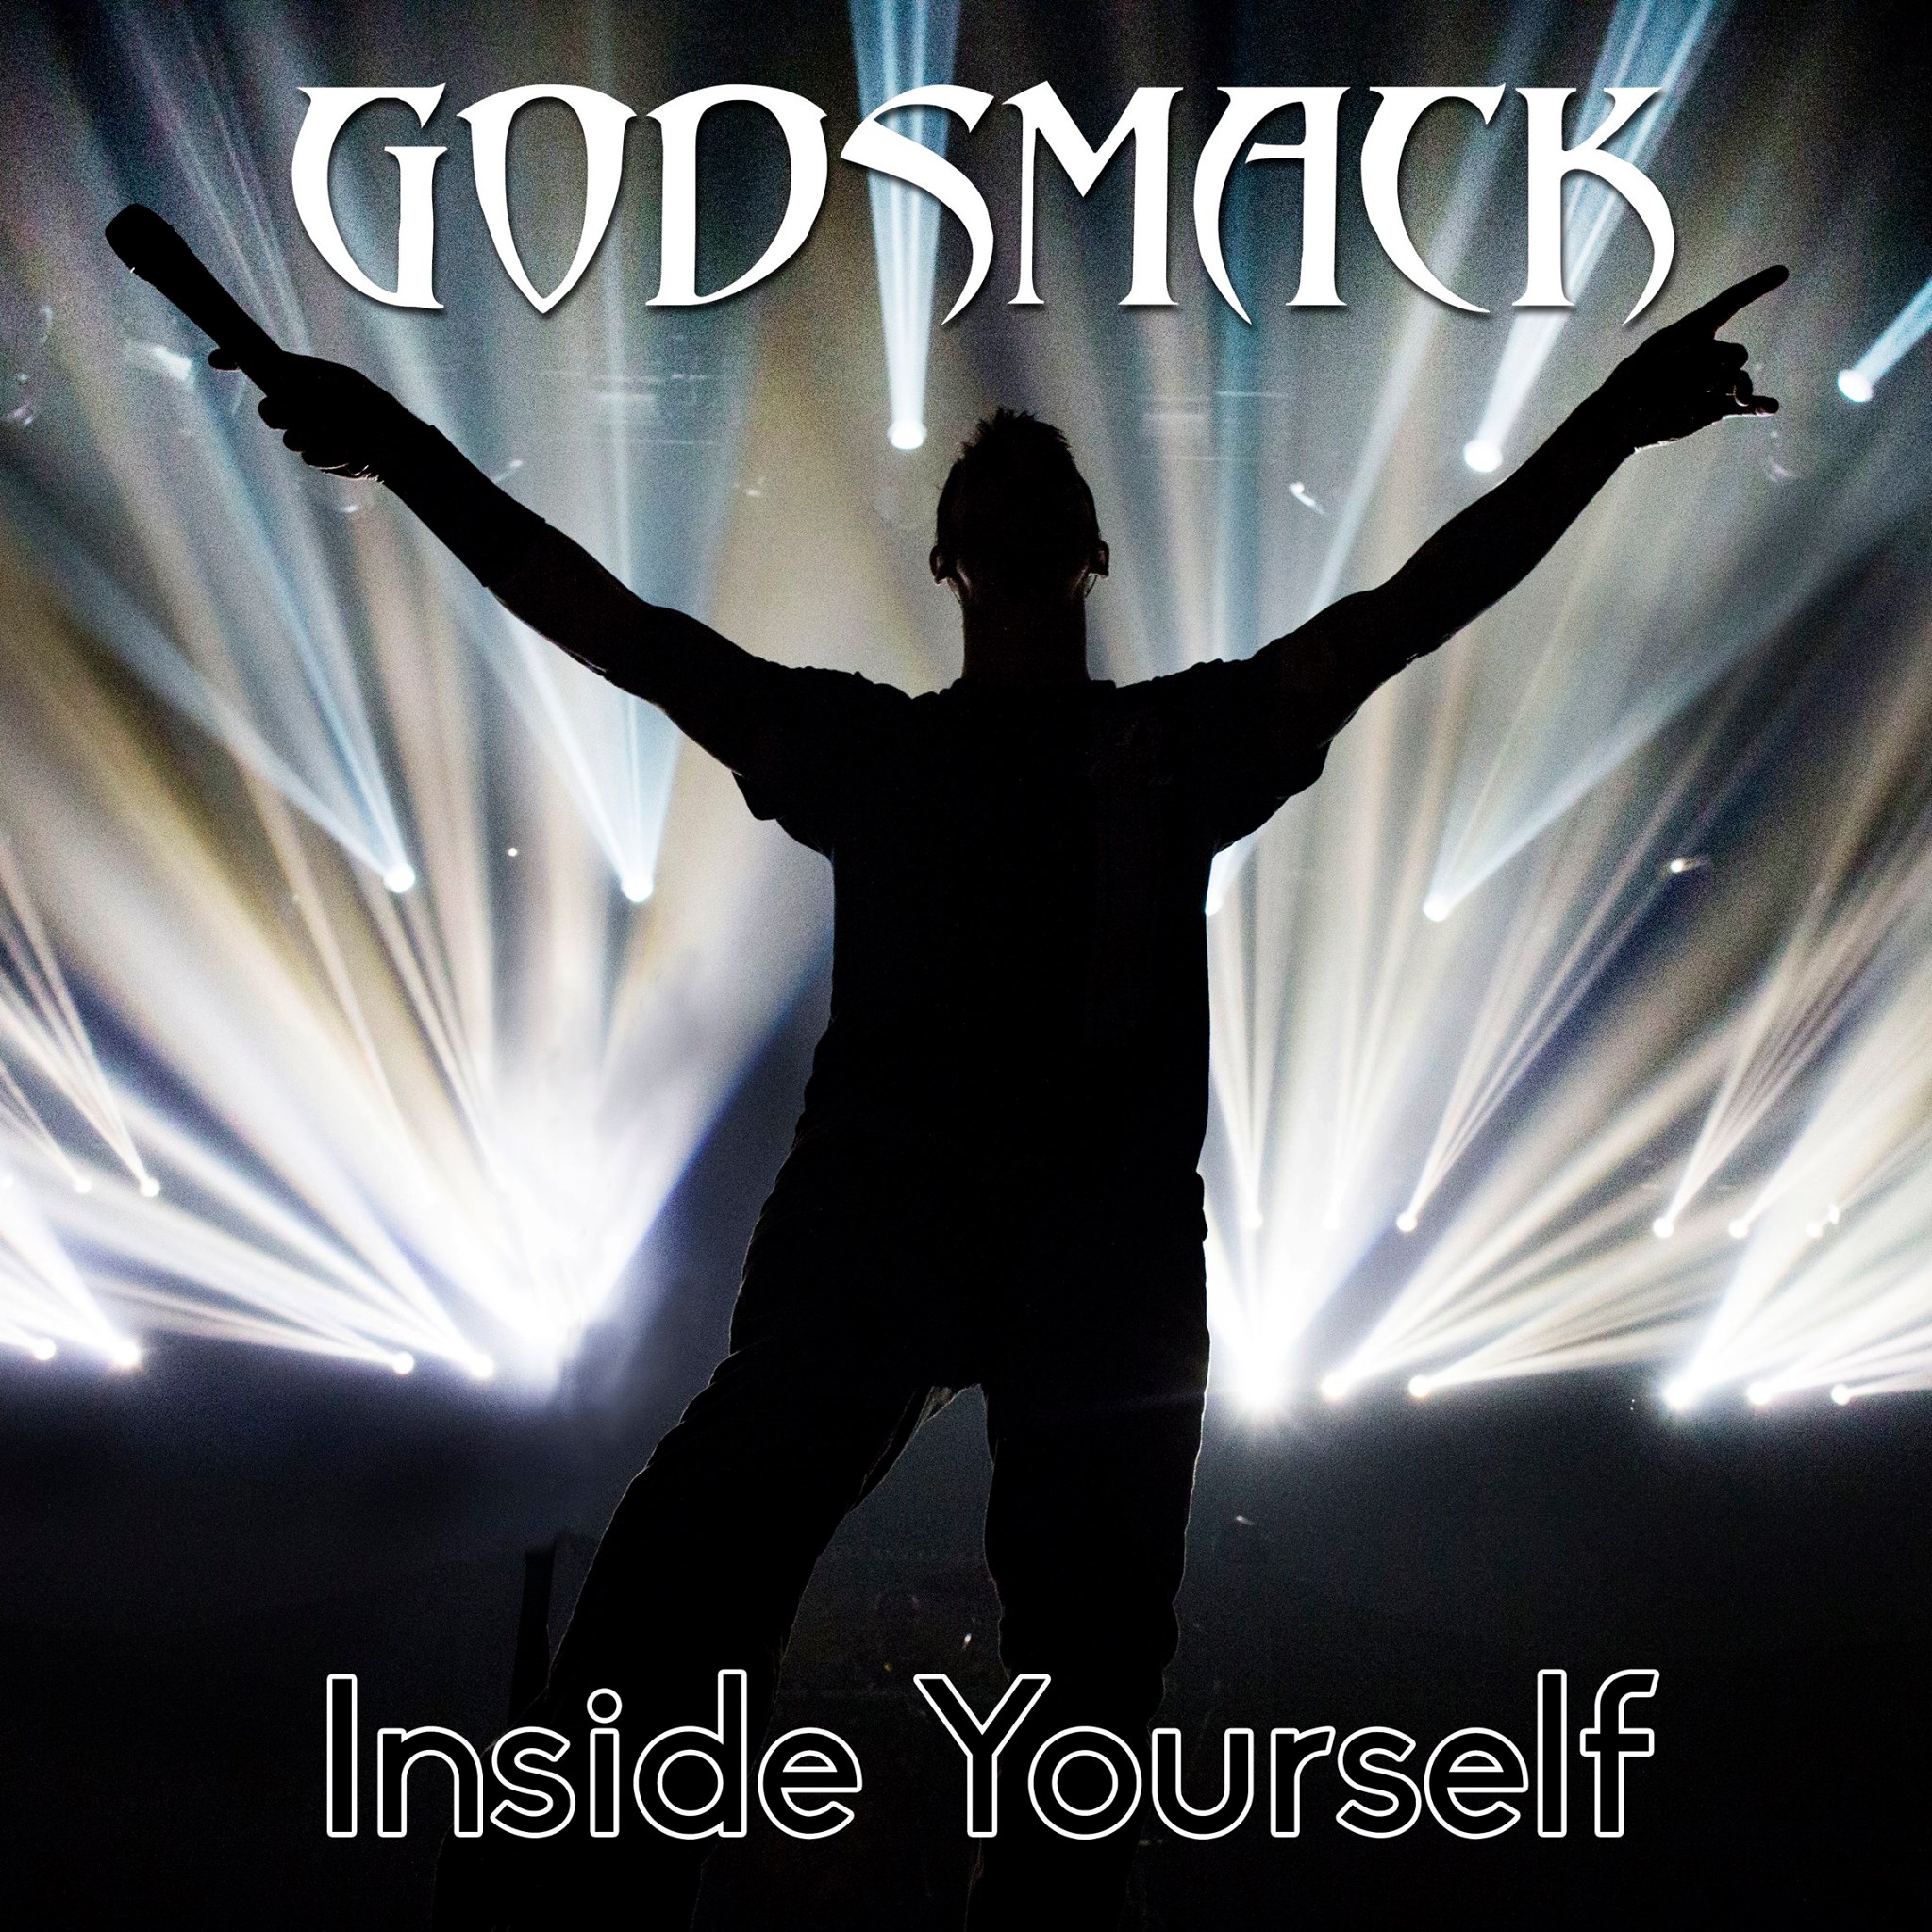 For a limited time, download Godsmack's new song "Inside Yourself" for free.